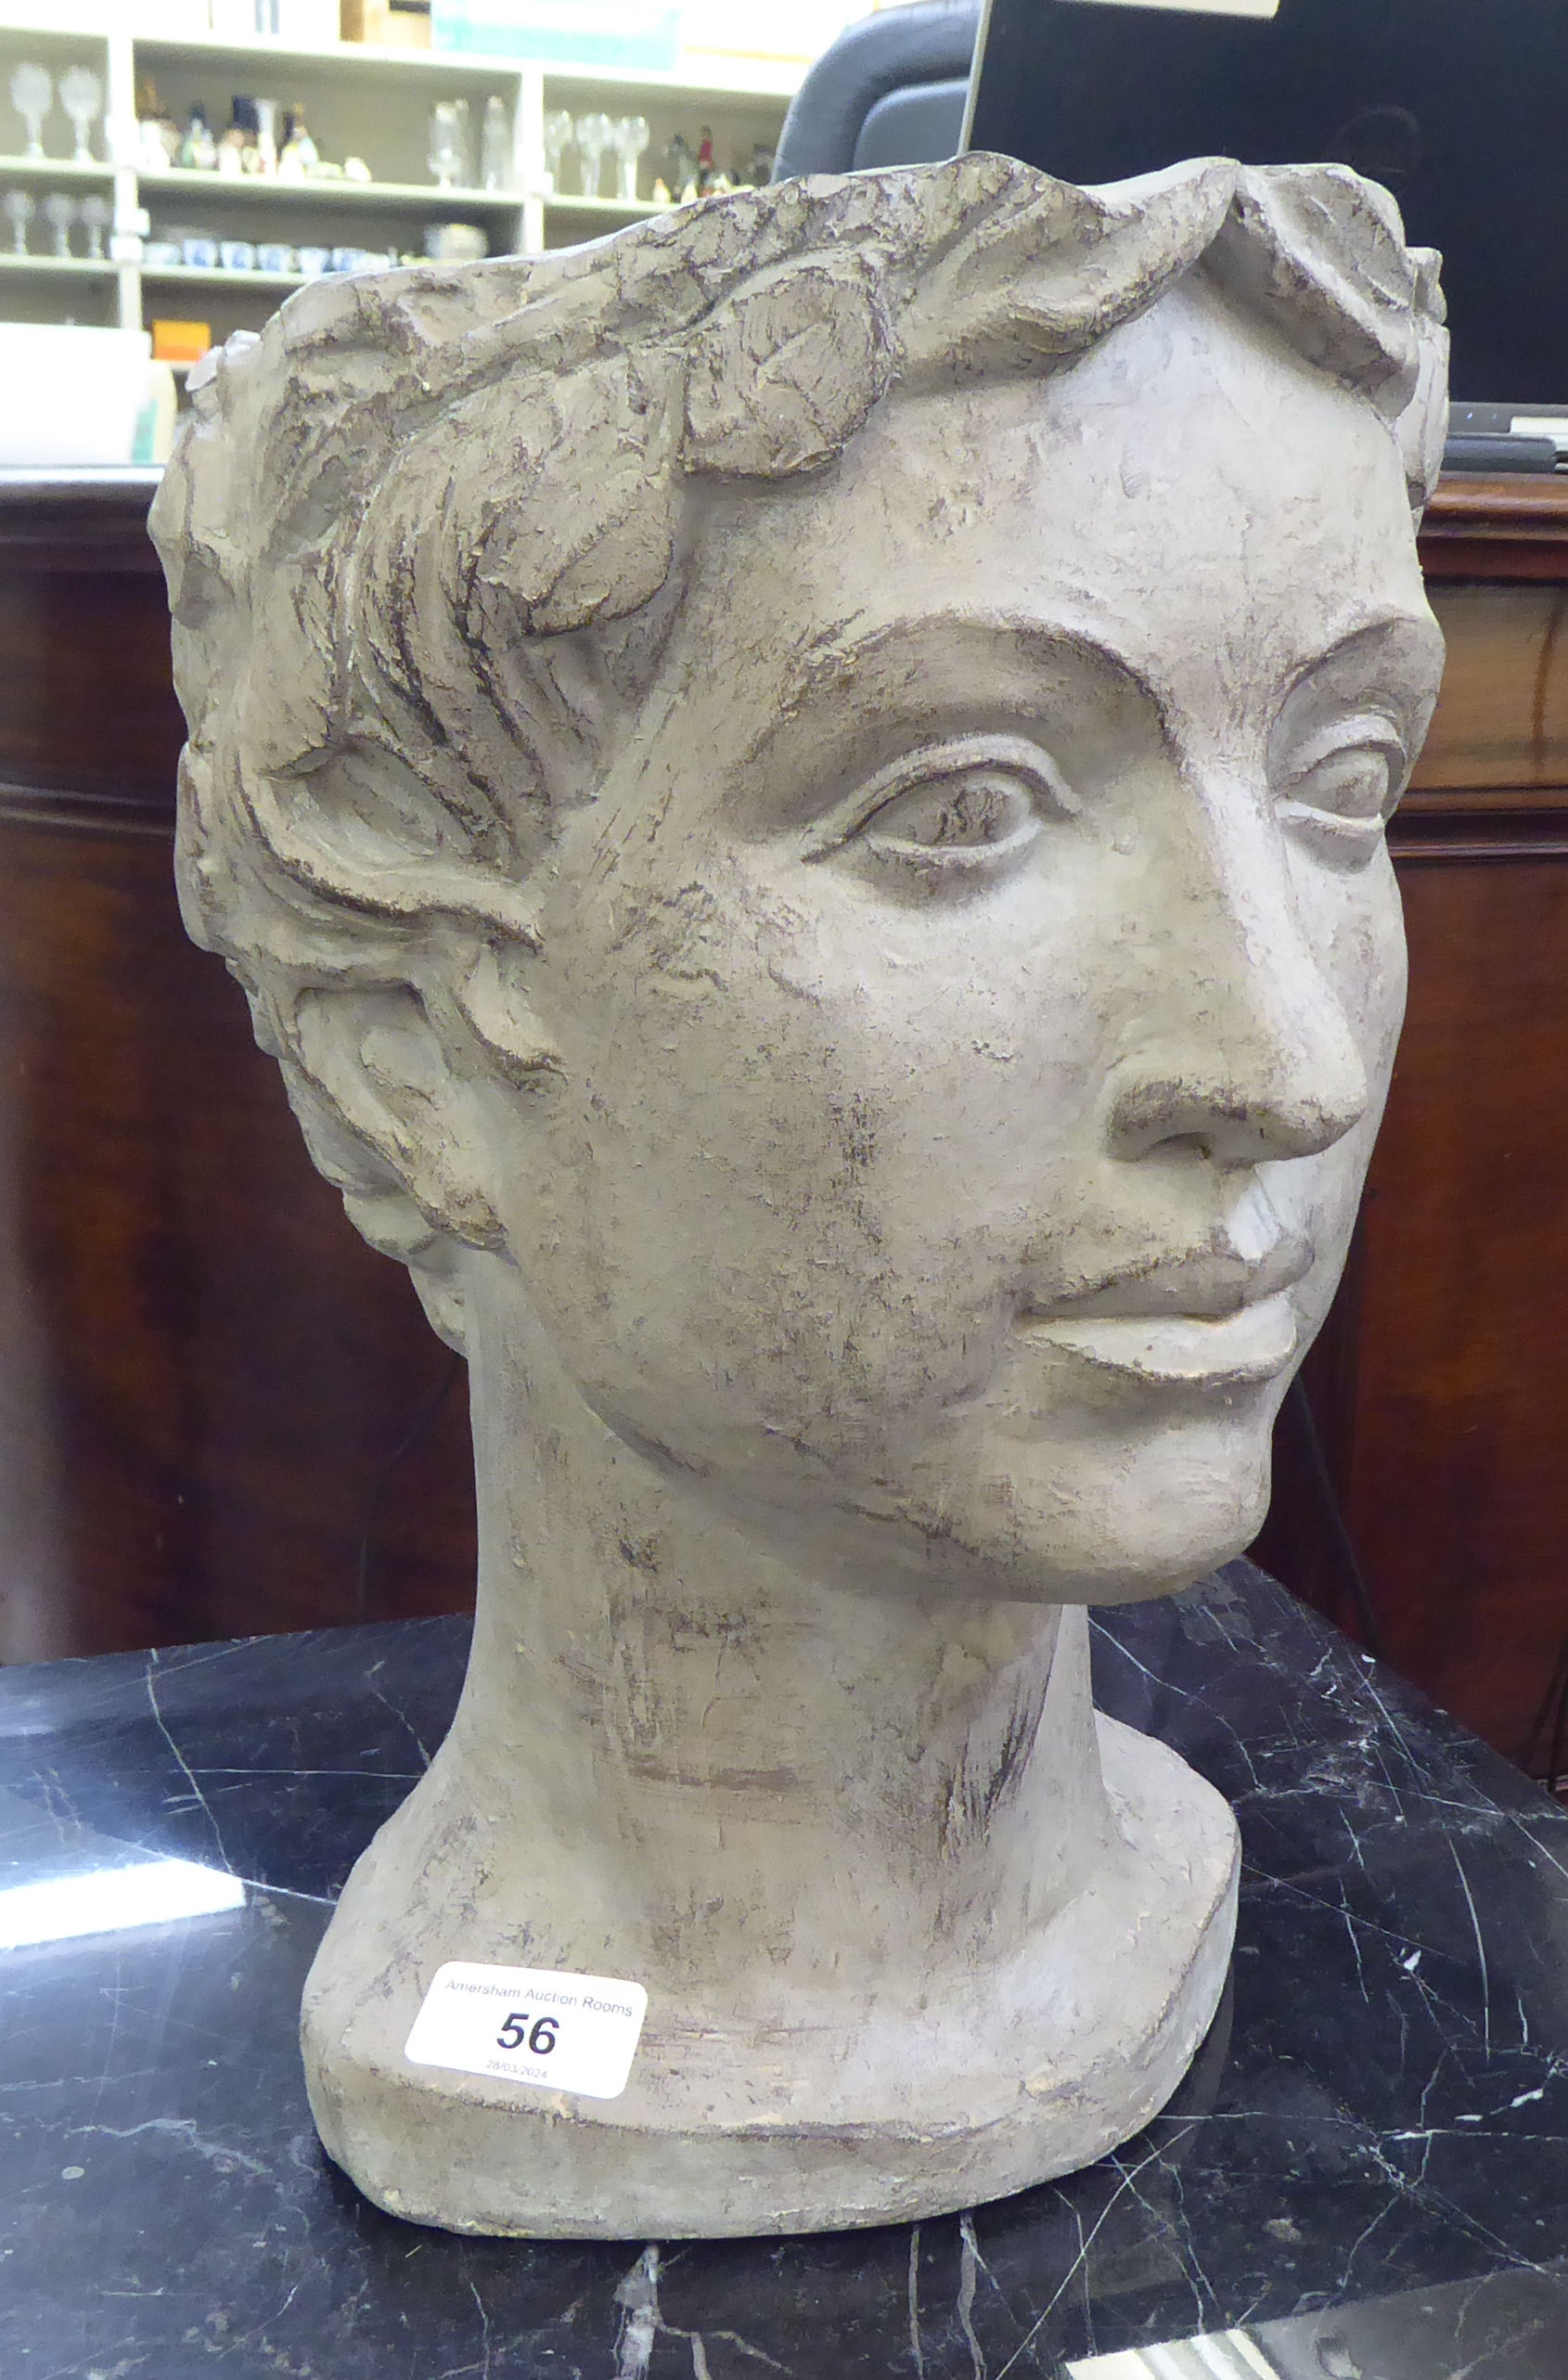 A painted plaster planter, fashioned as a young woman's head  13"h